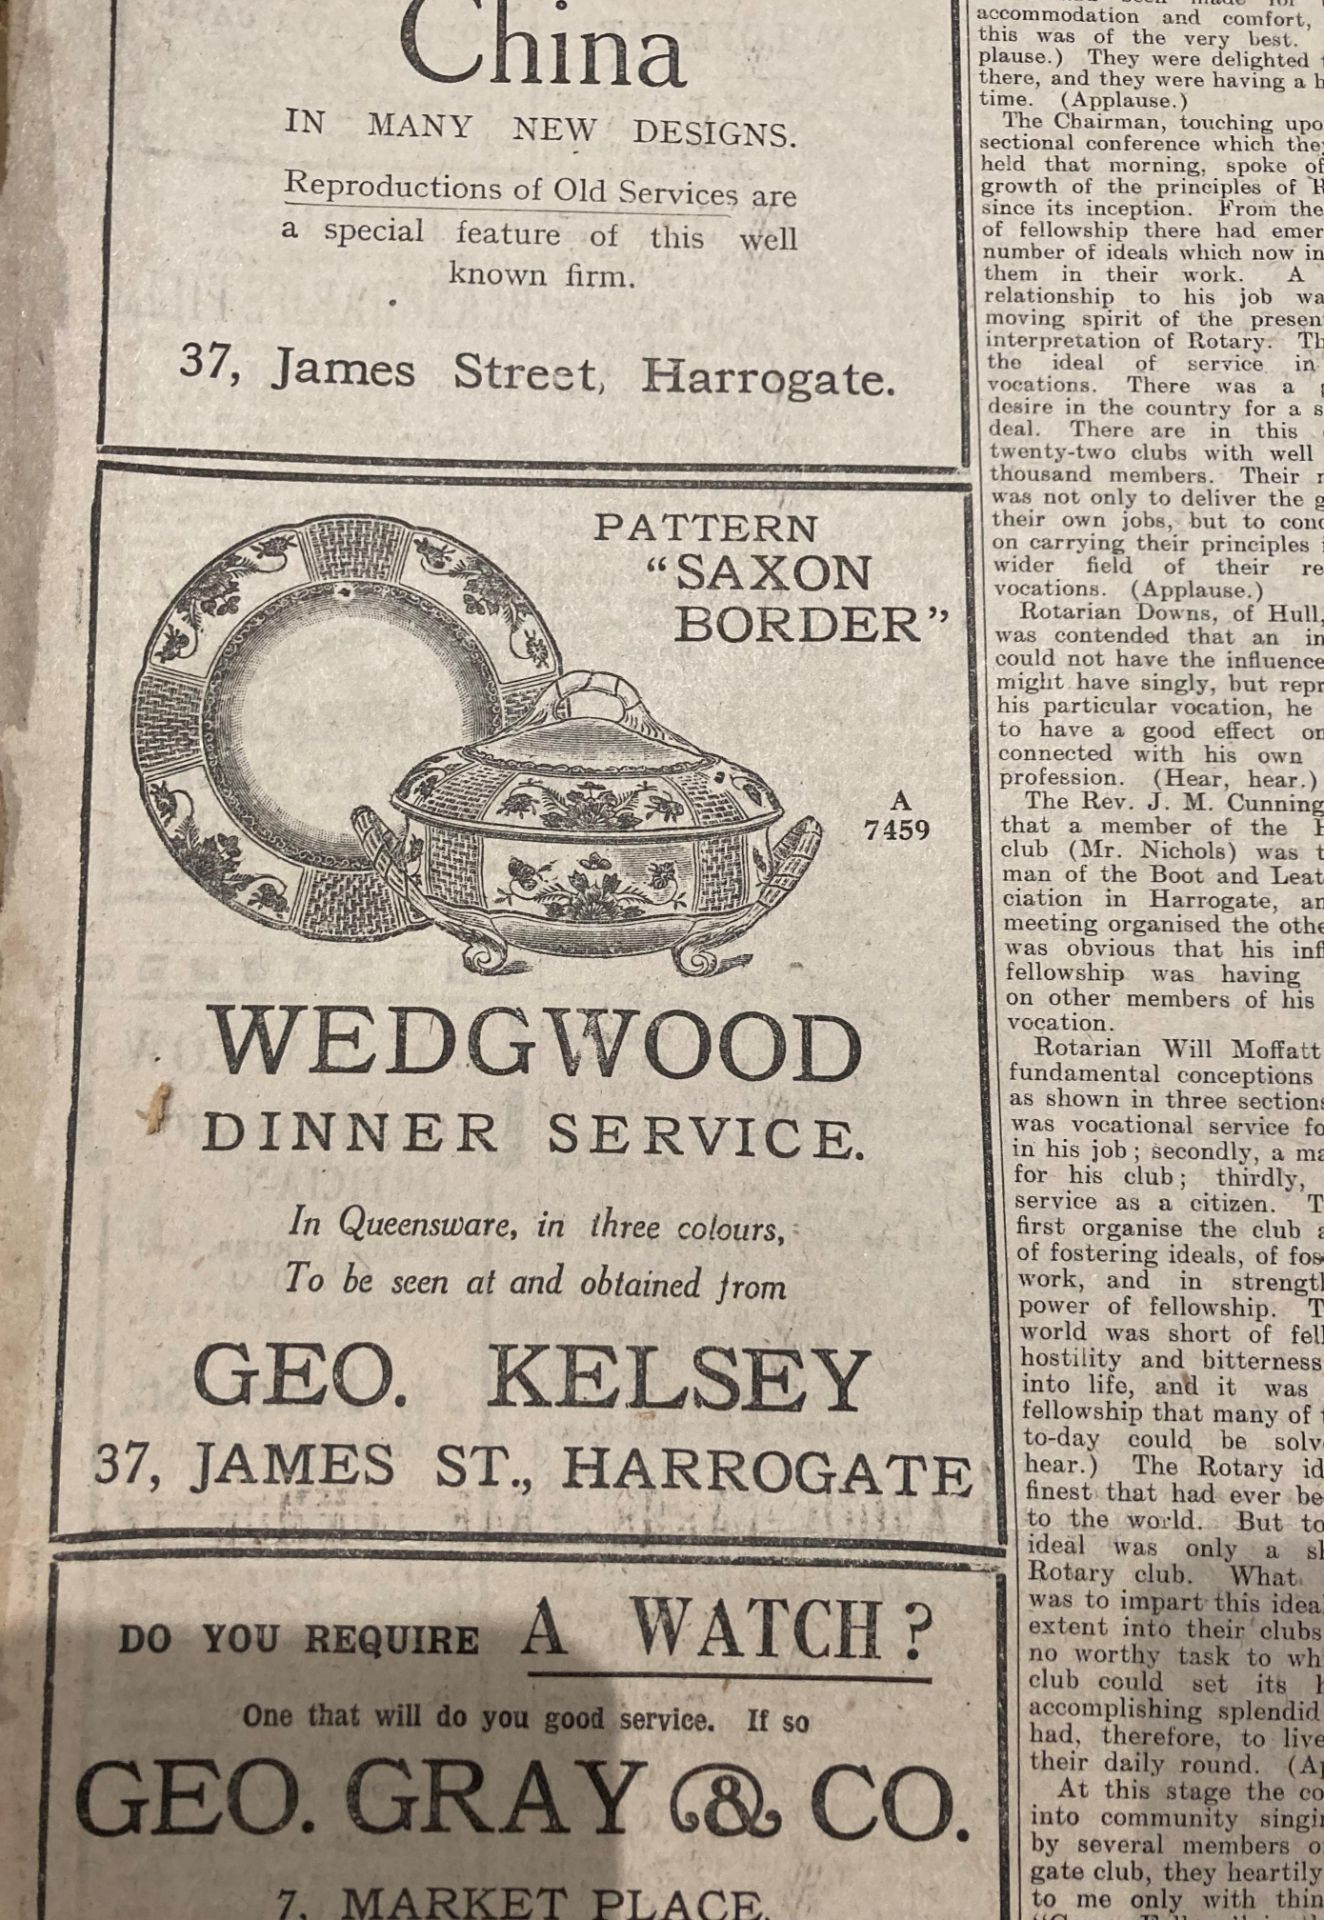 The Harrogate Herald and Weekly List of Visitors No 45 vol LXIII - Wed Jan 5th 1927 to Dec 28th - - Image 9 of 12